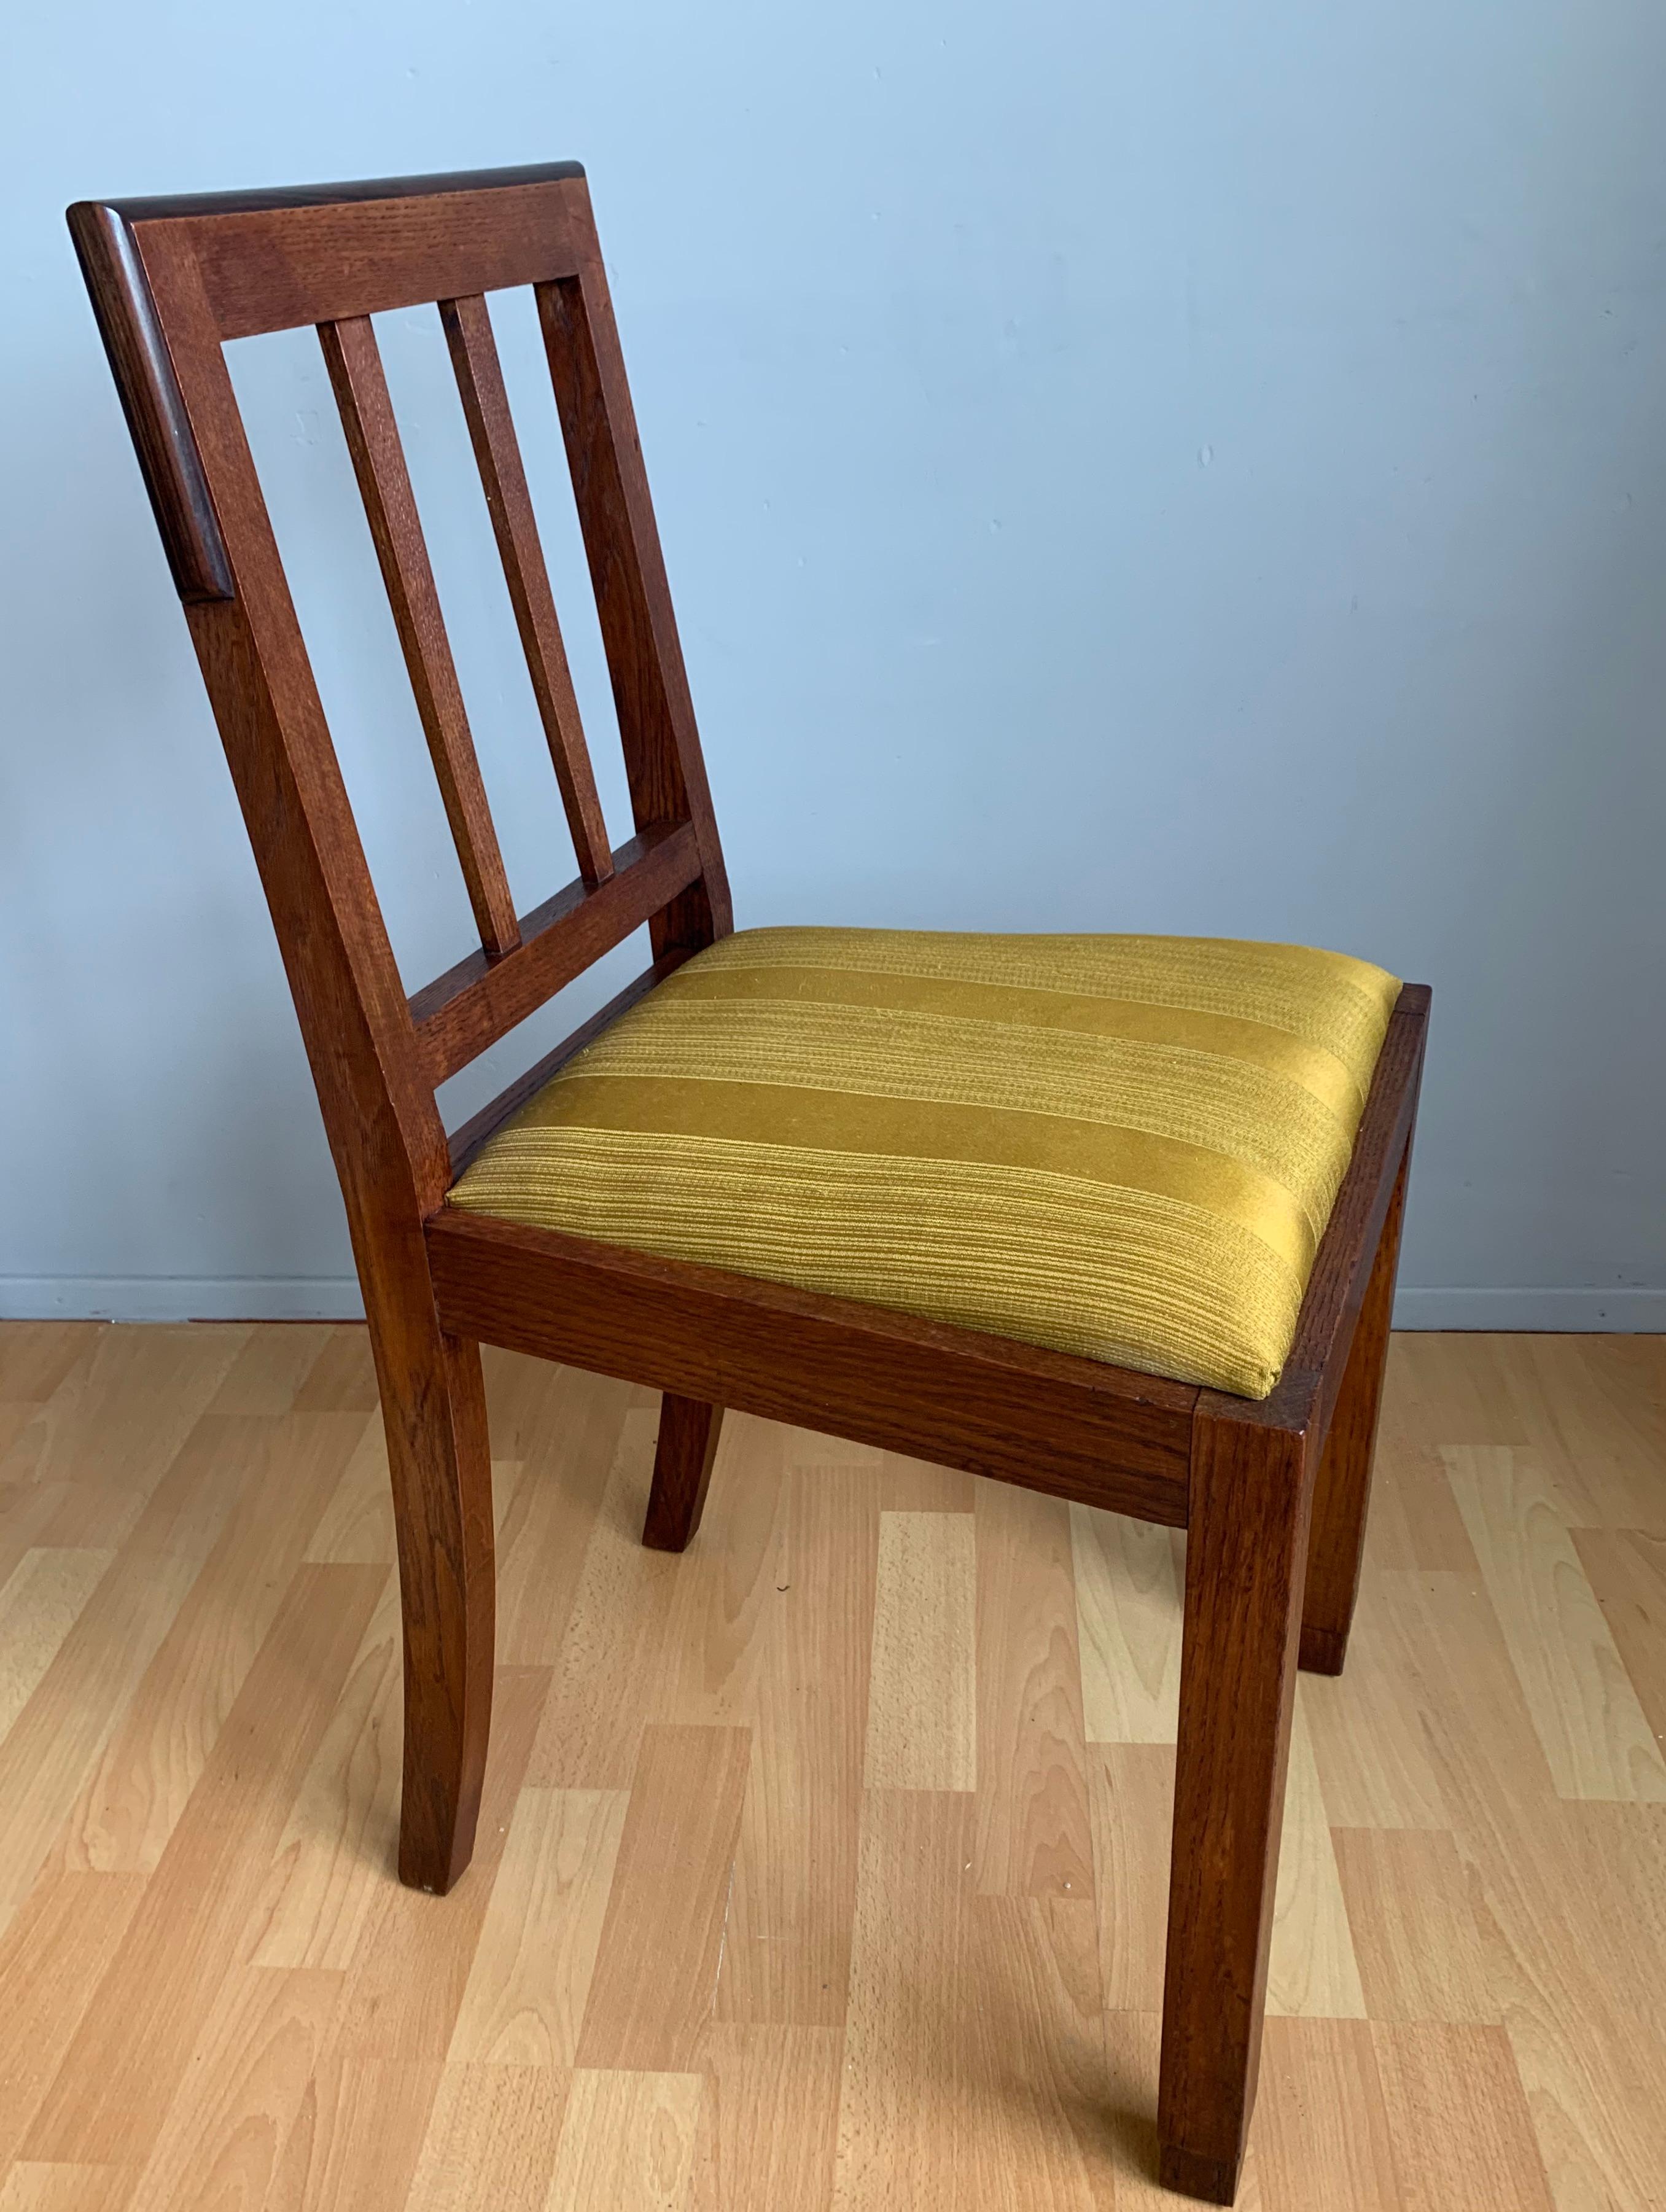 Geometrical design Dutch Arts & Crafts desk chair for the ladies.

Those who have purchased an antique Arts & Crafts or even an Art Deco ladies desk may have found that finding the right chair (of the period) can be a real challenge. This relatively